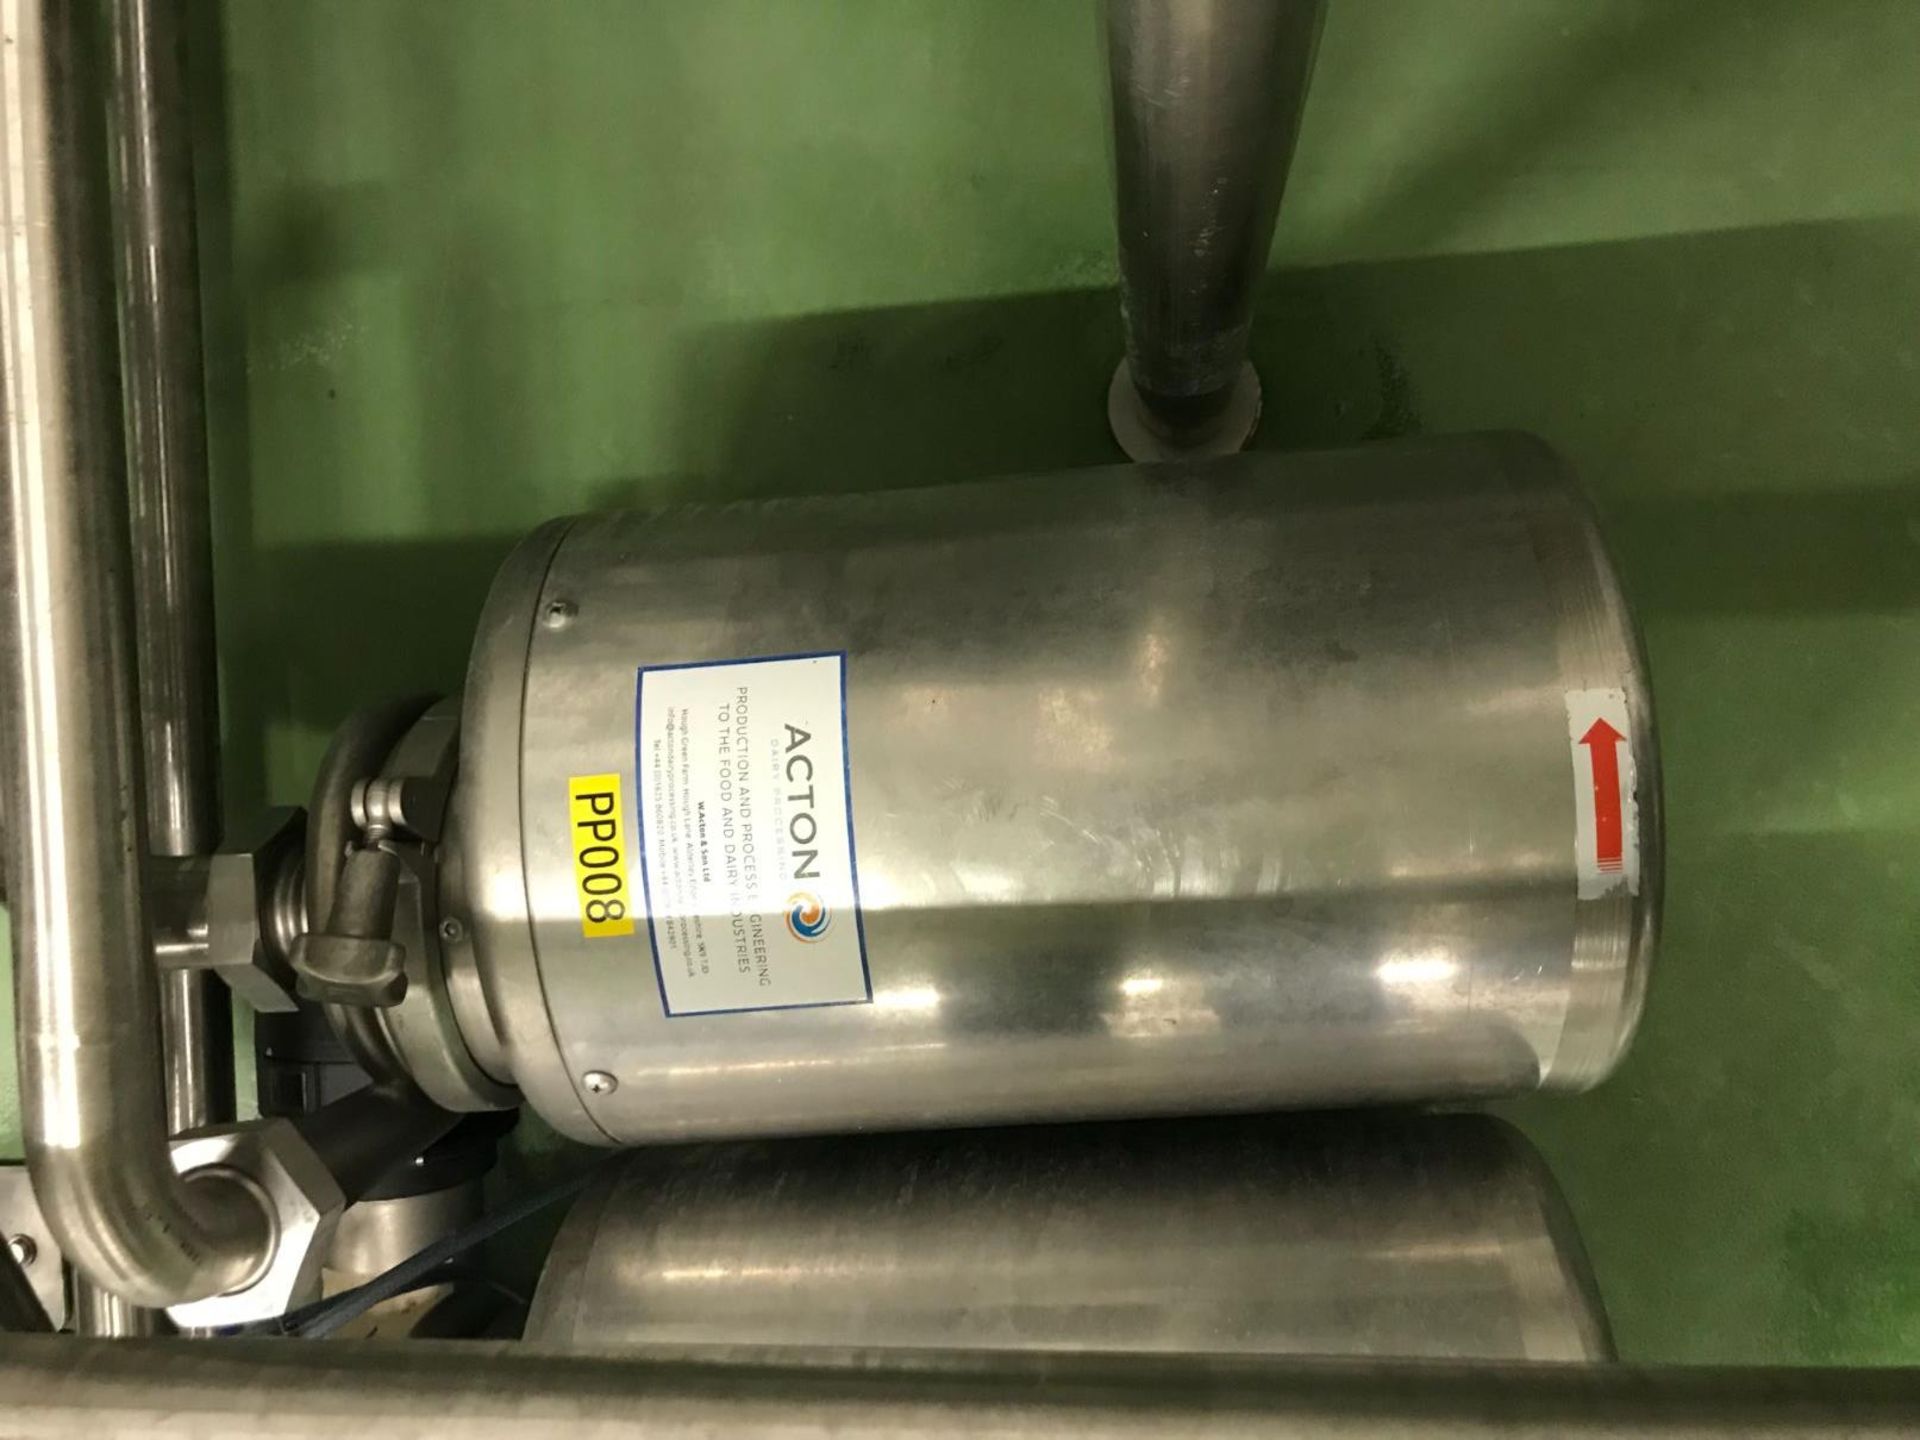 Acton stainless steel centrifugal pump. Ref: PP008